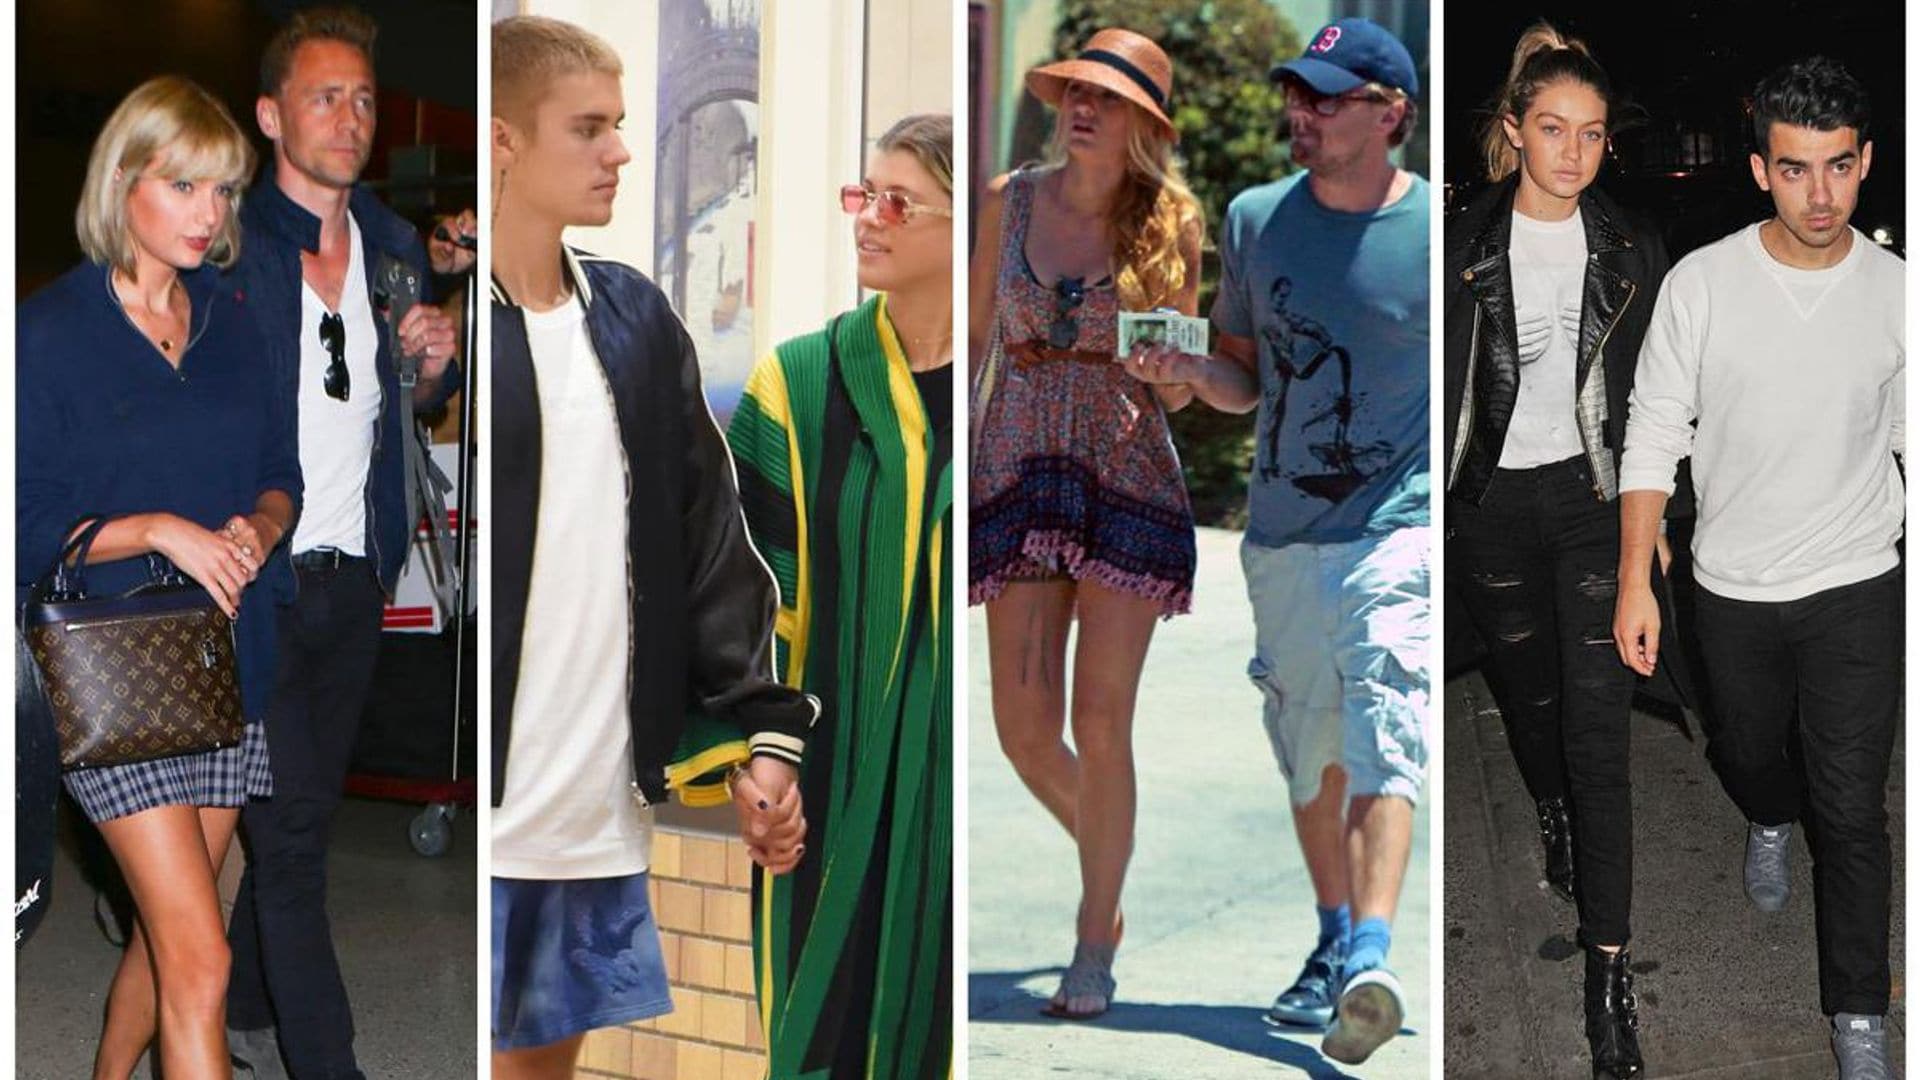 From Justin Bieber & Sofia Richie to Zac Efron & Michelle Rodriguez: The short-lived celebrity romances you (probably) forgot about